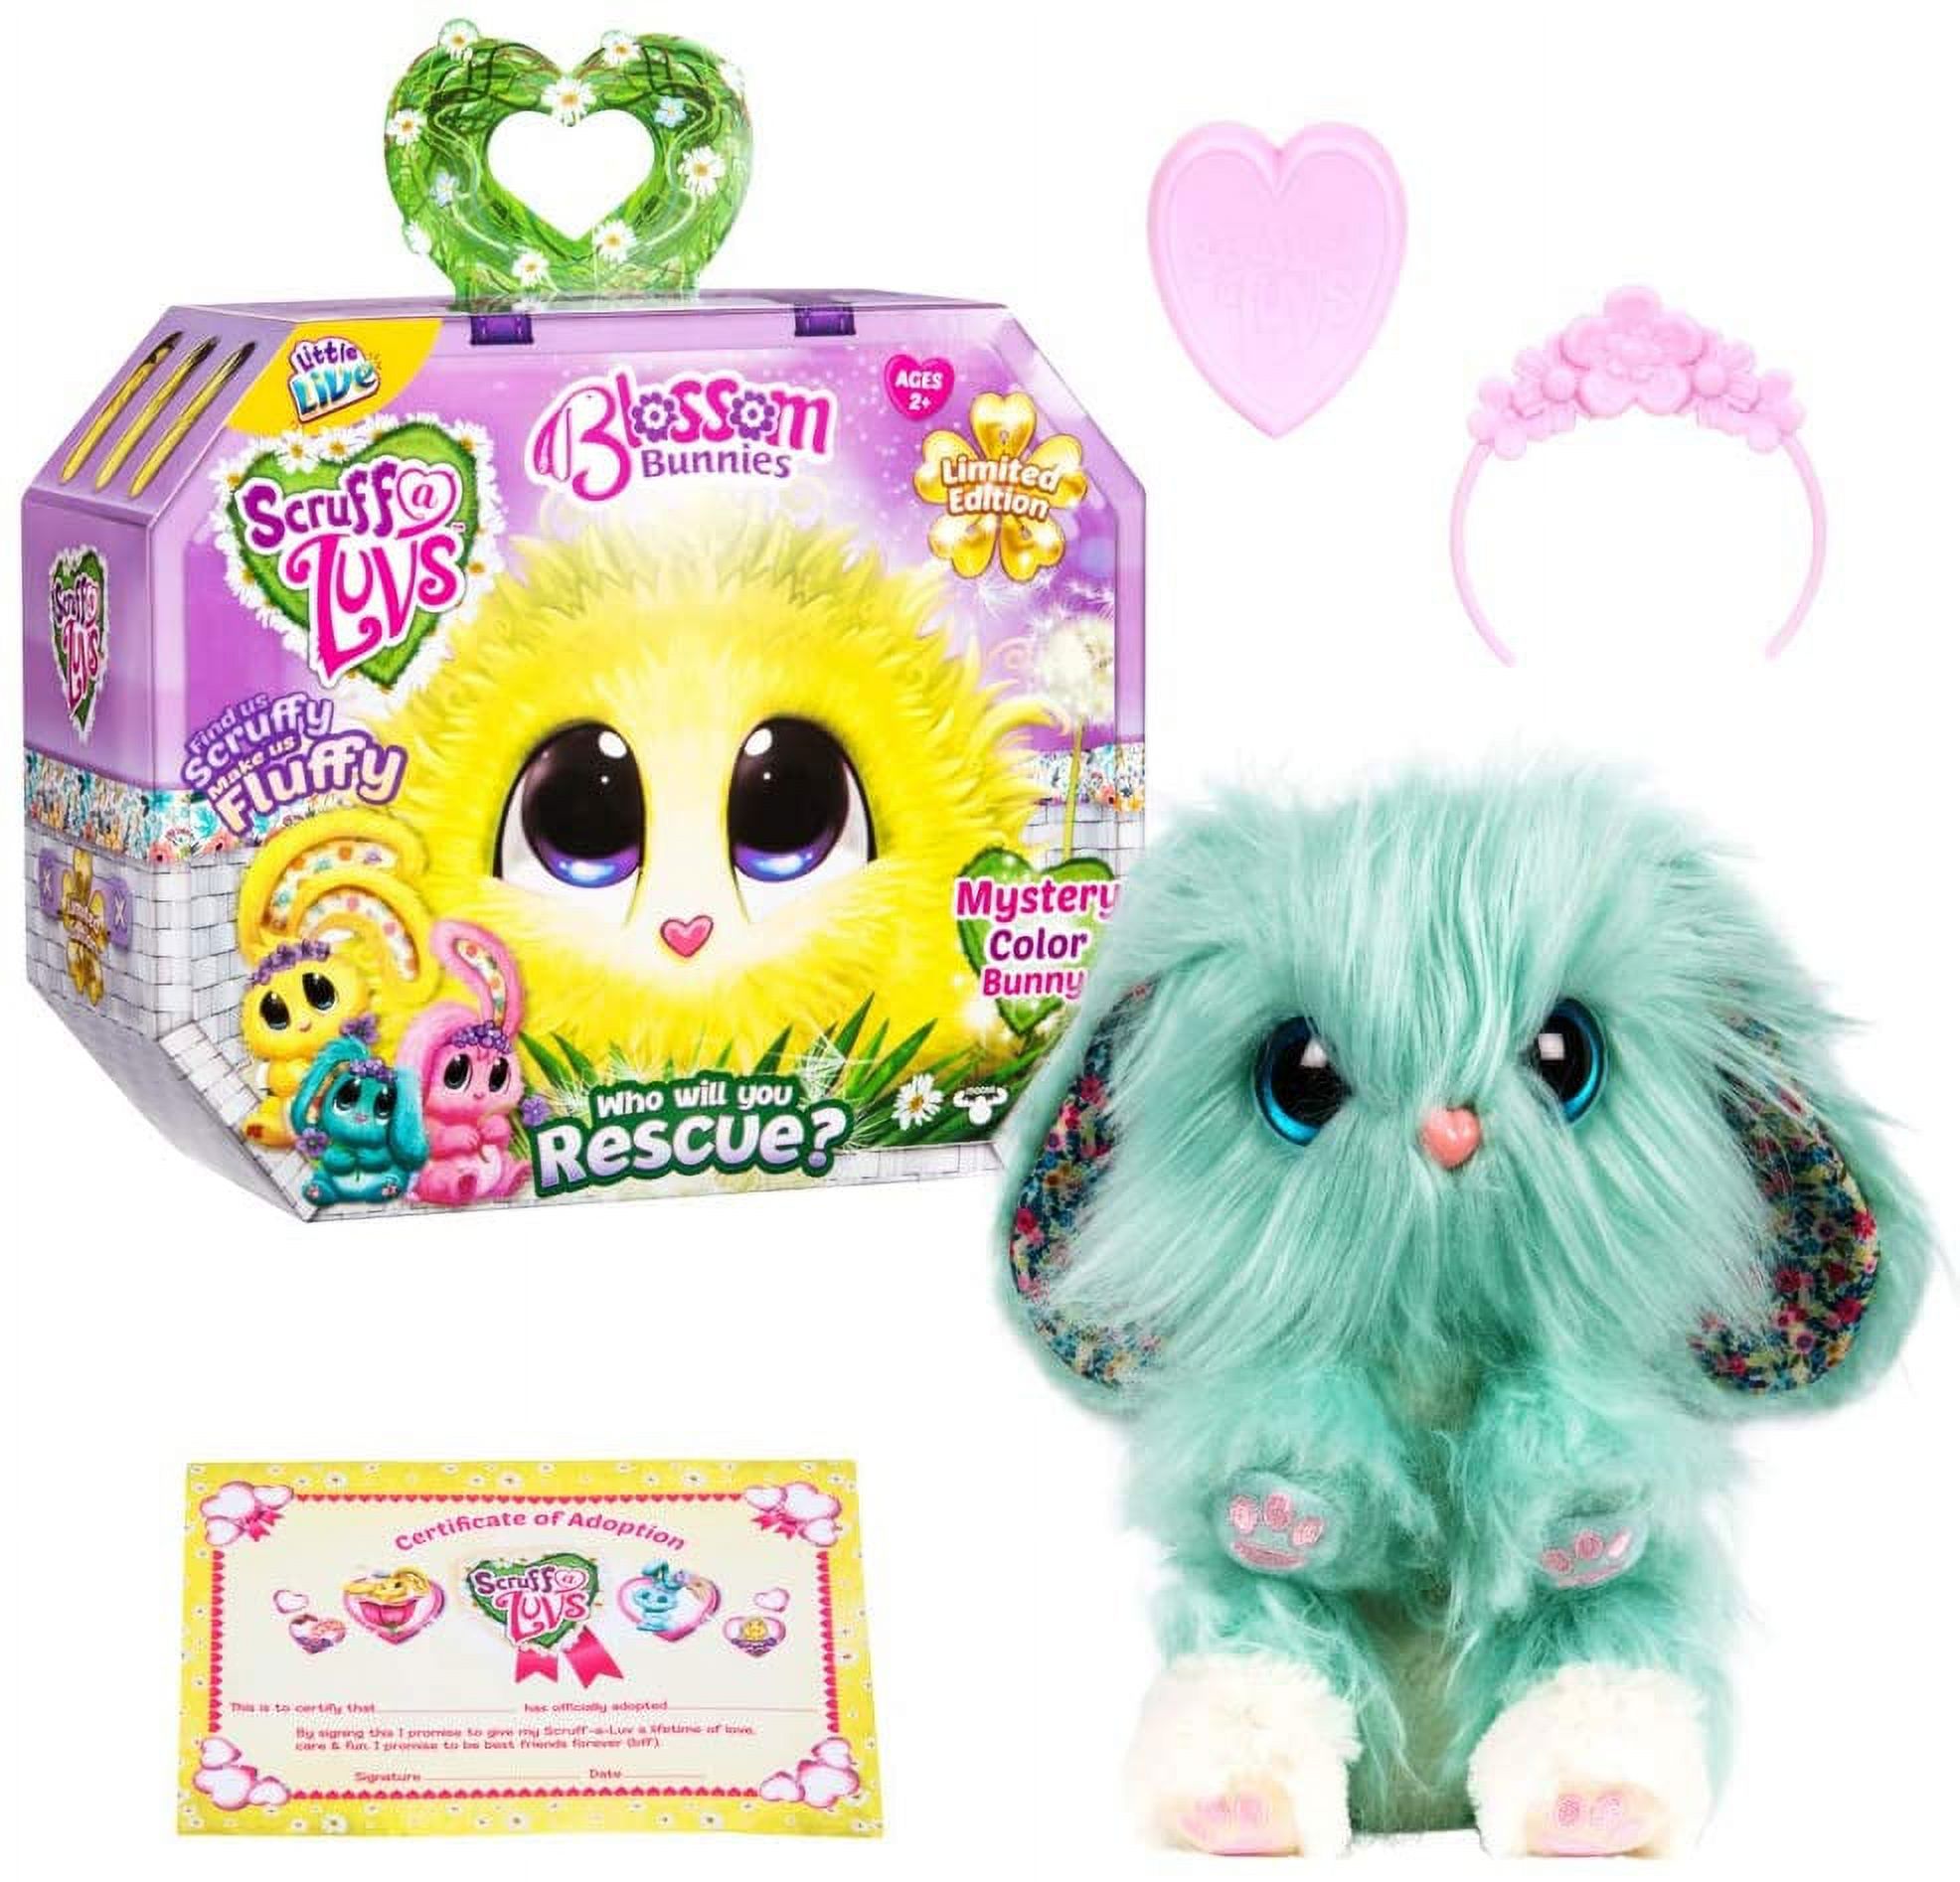 Little Live Pets Scruff-a-Luvs™ Plush Mystery Rescue Pet, Blossom Bunnies - image 2 of 8